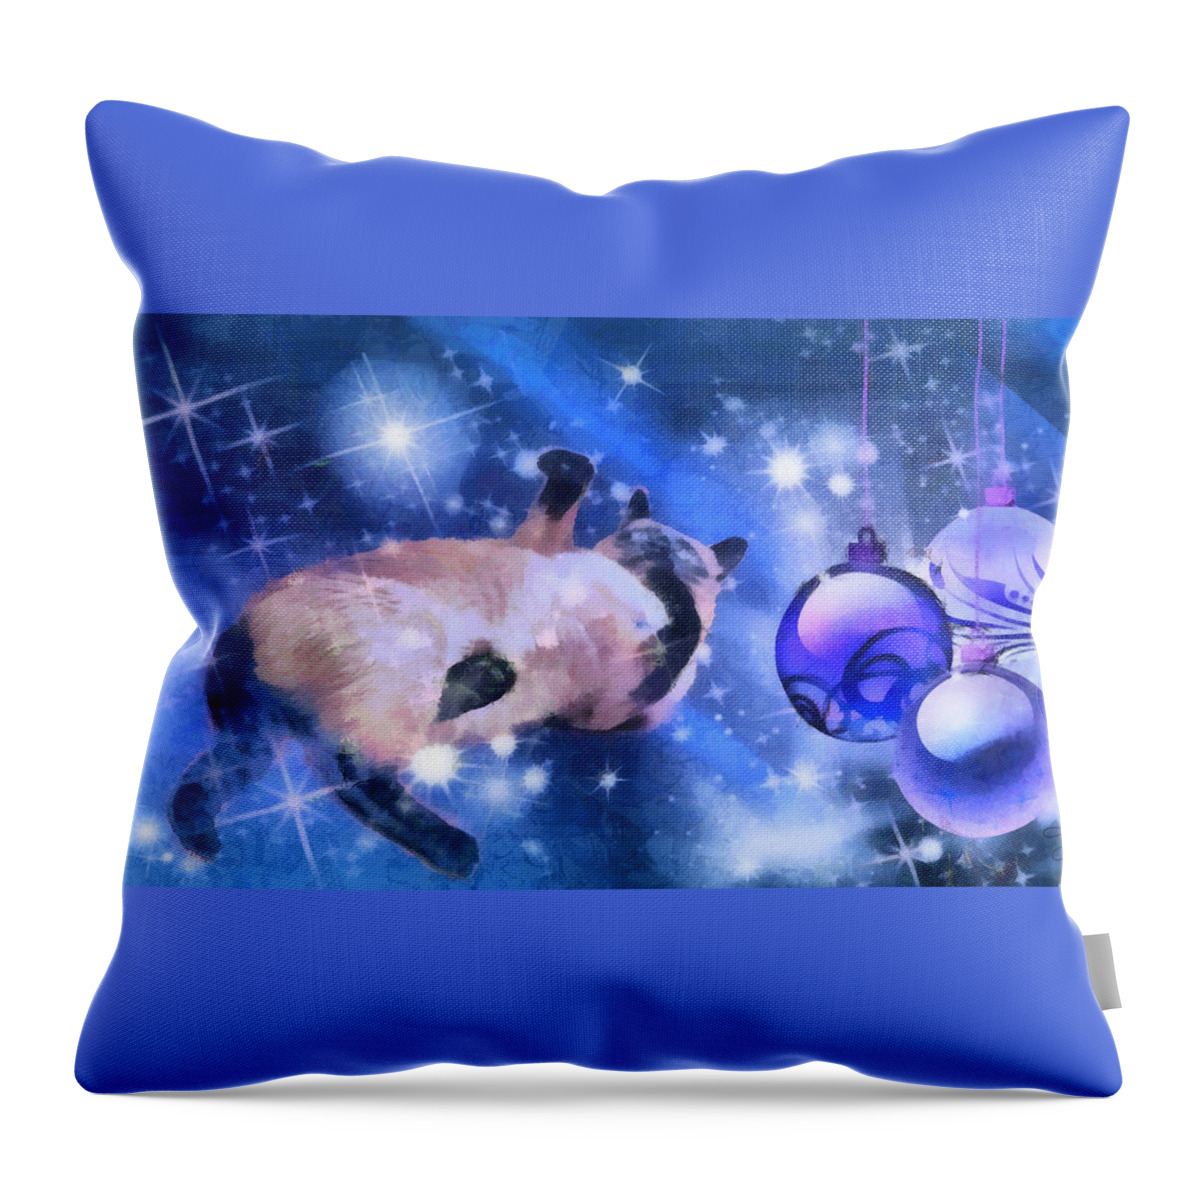  Throw Pillow featuring the digital art Sulley's Christmas Blues by Theresa Campbell